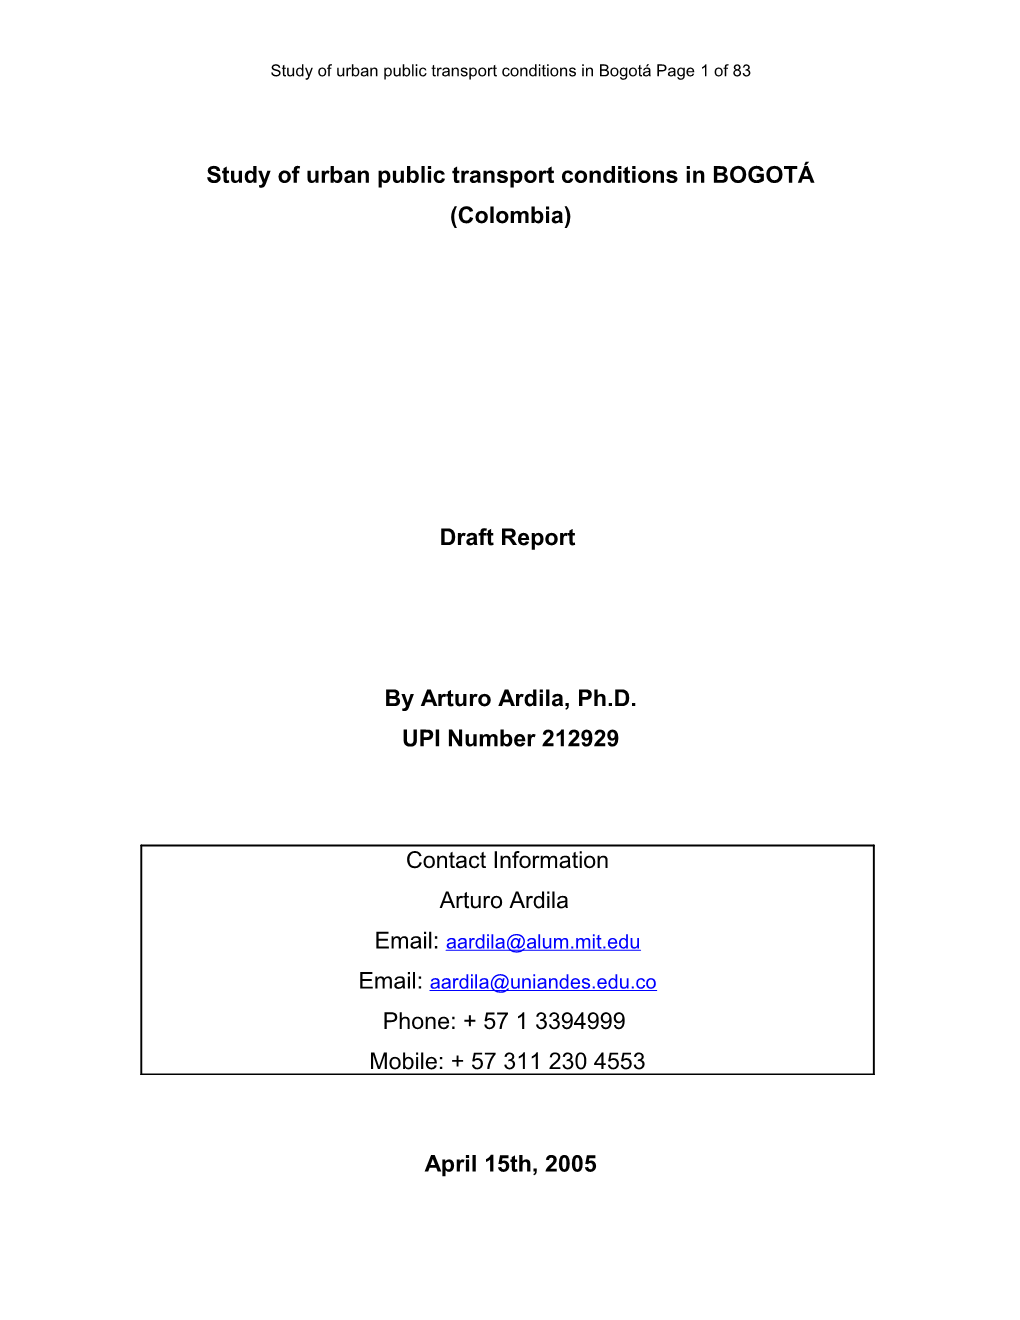 Study of Urban Public Transport Conditions in BOGOTA (Colombia)